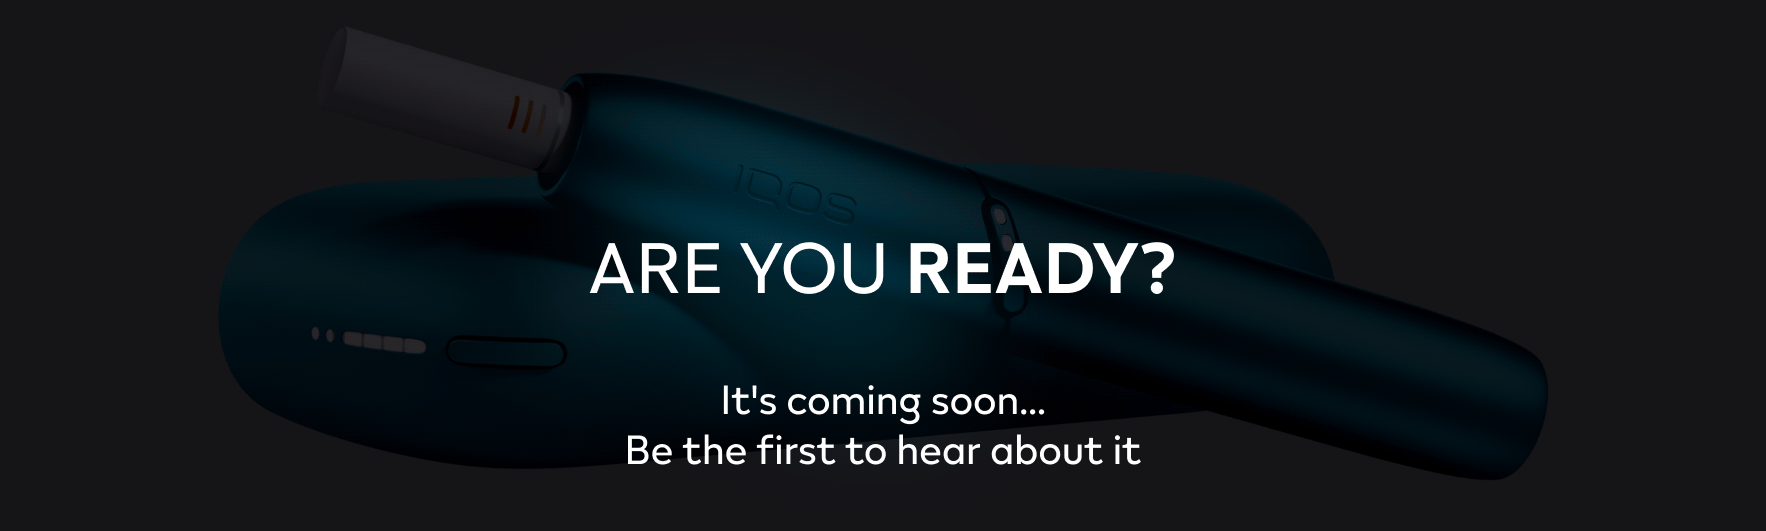 Coming soon...  The familiar IQOS in four new colors!